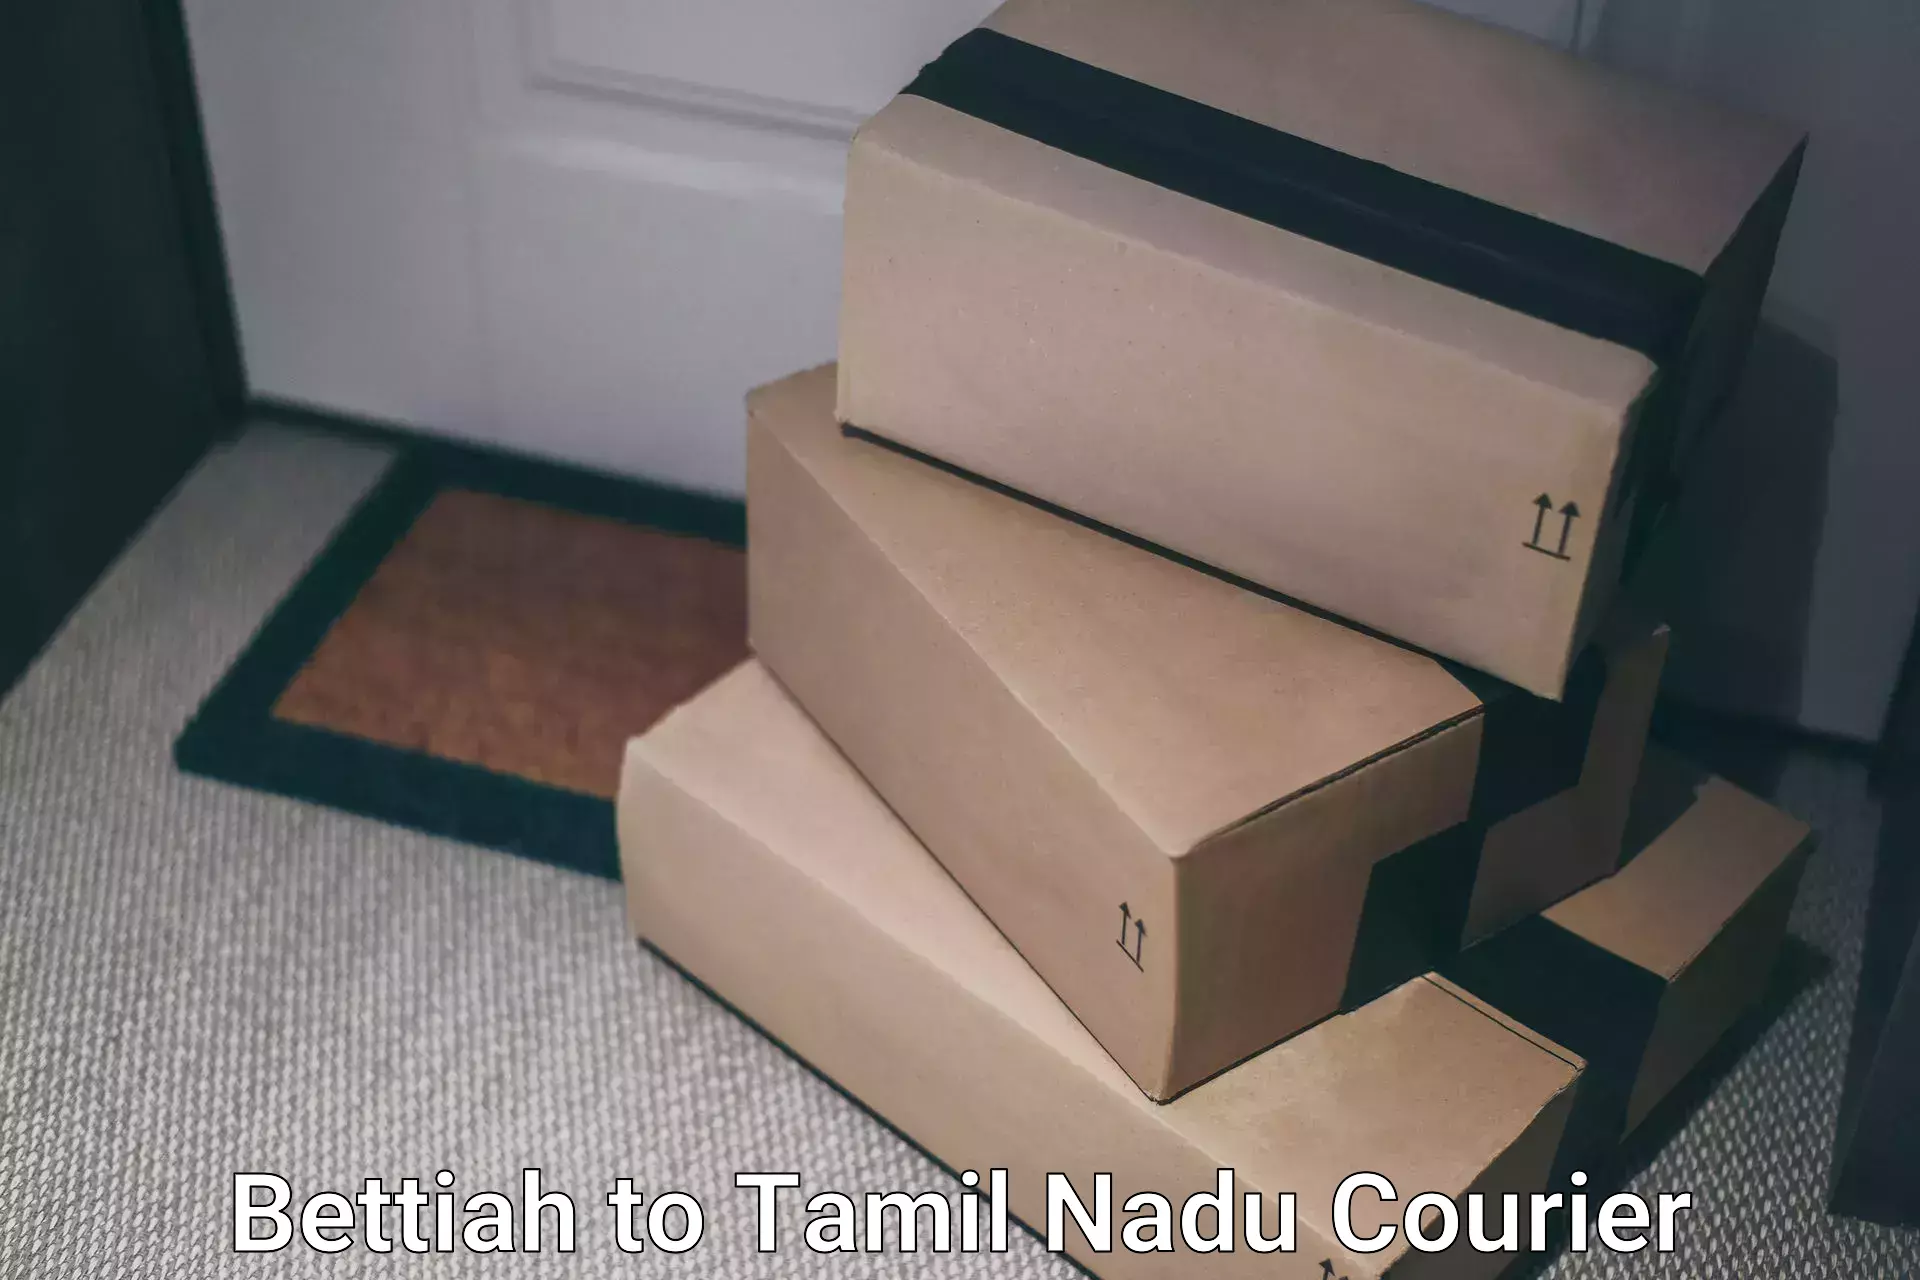 Small parcel delivery in Bettiah to Tiruvannamalai